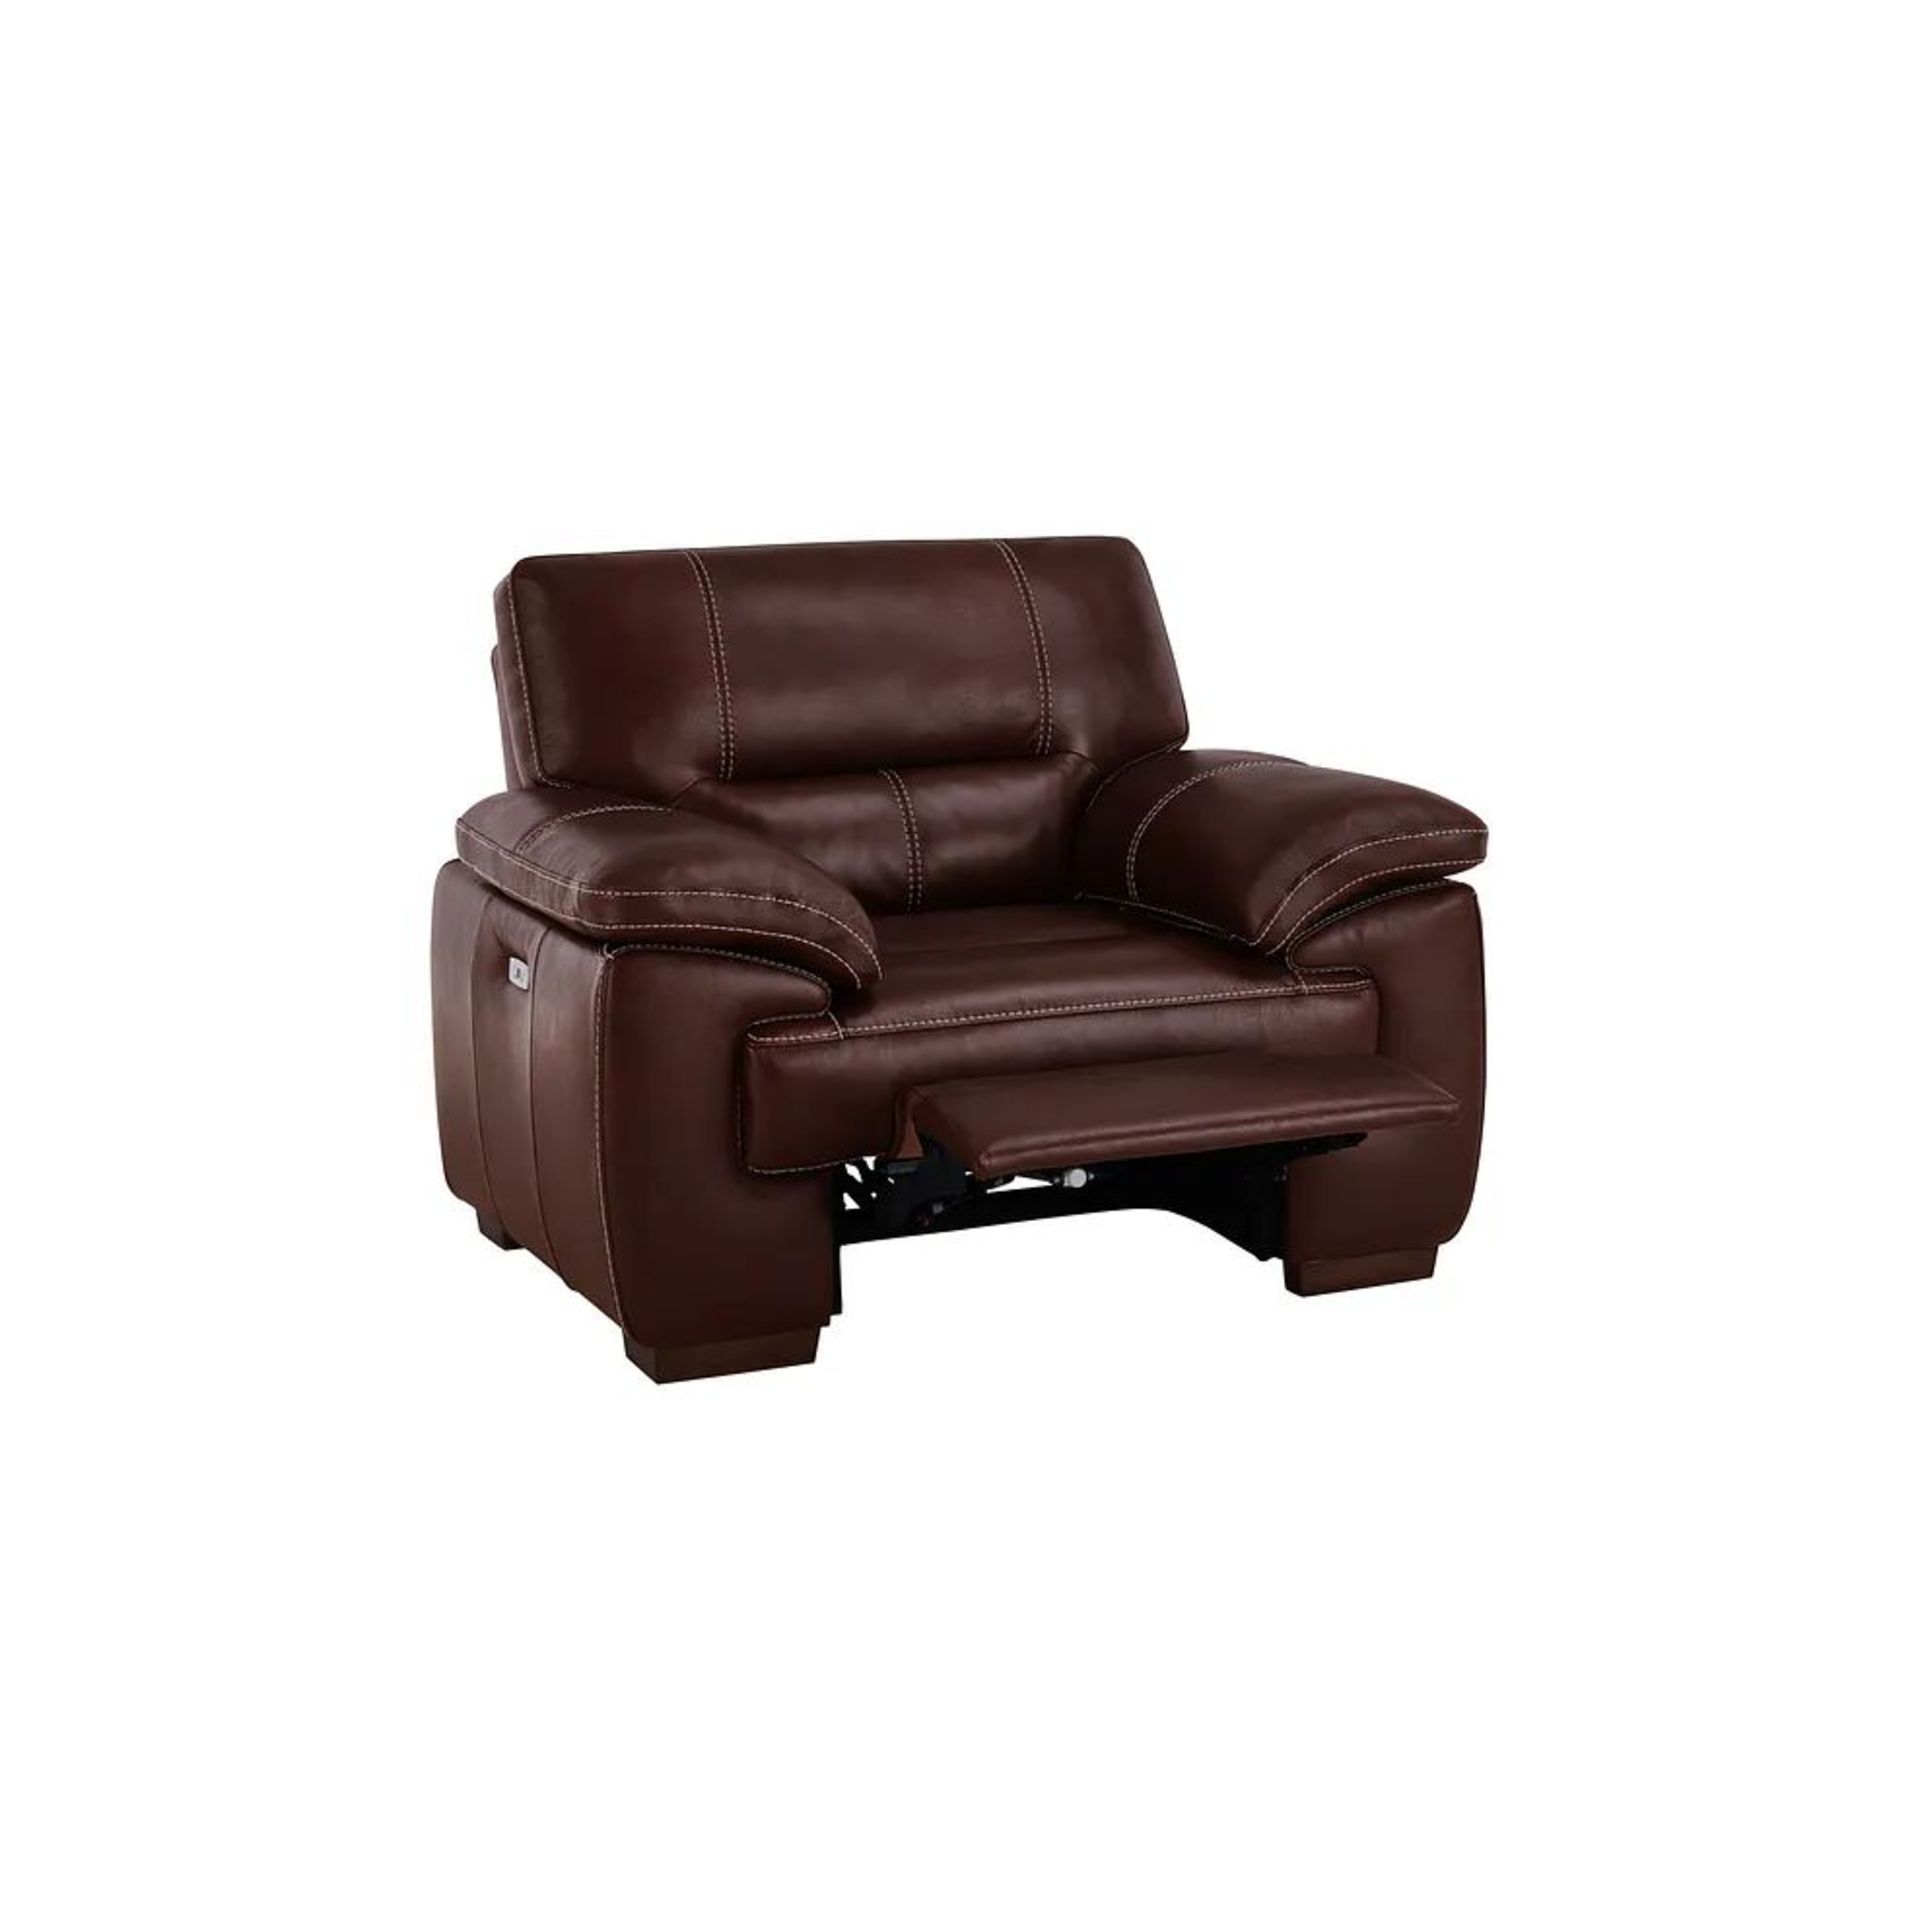 BRAND NEW ARLINGTON Electric Recliner Armchair - TAN LEATHER. RRP £1199. Create a traditional and - Image 4 of 12